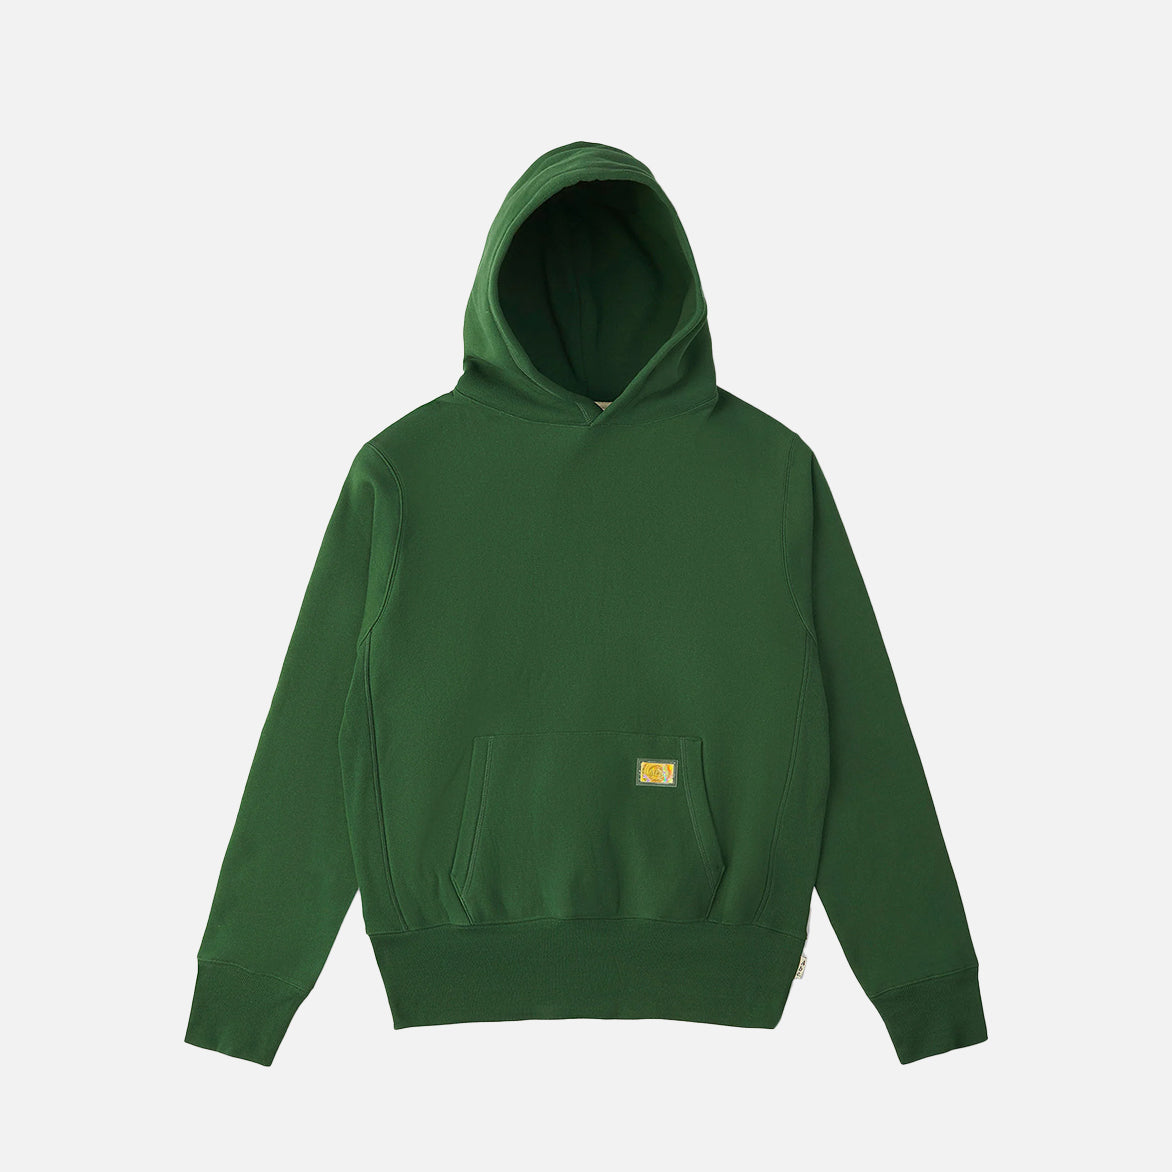 ABC 123 PULLOVER HOODIE - GREEN